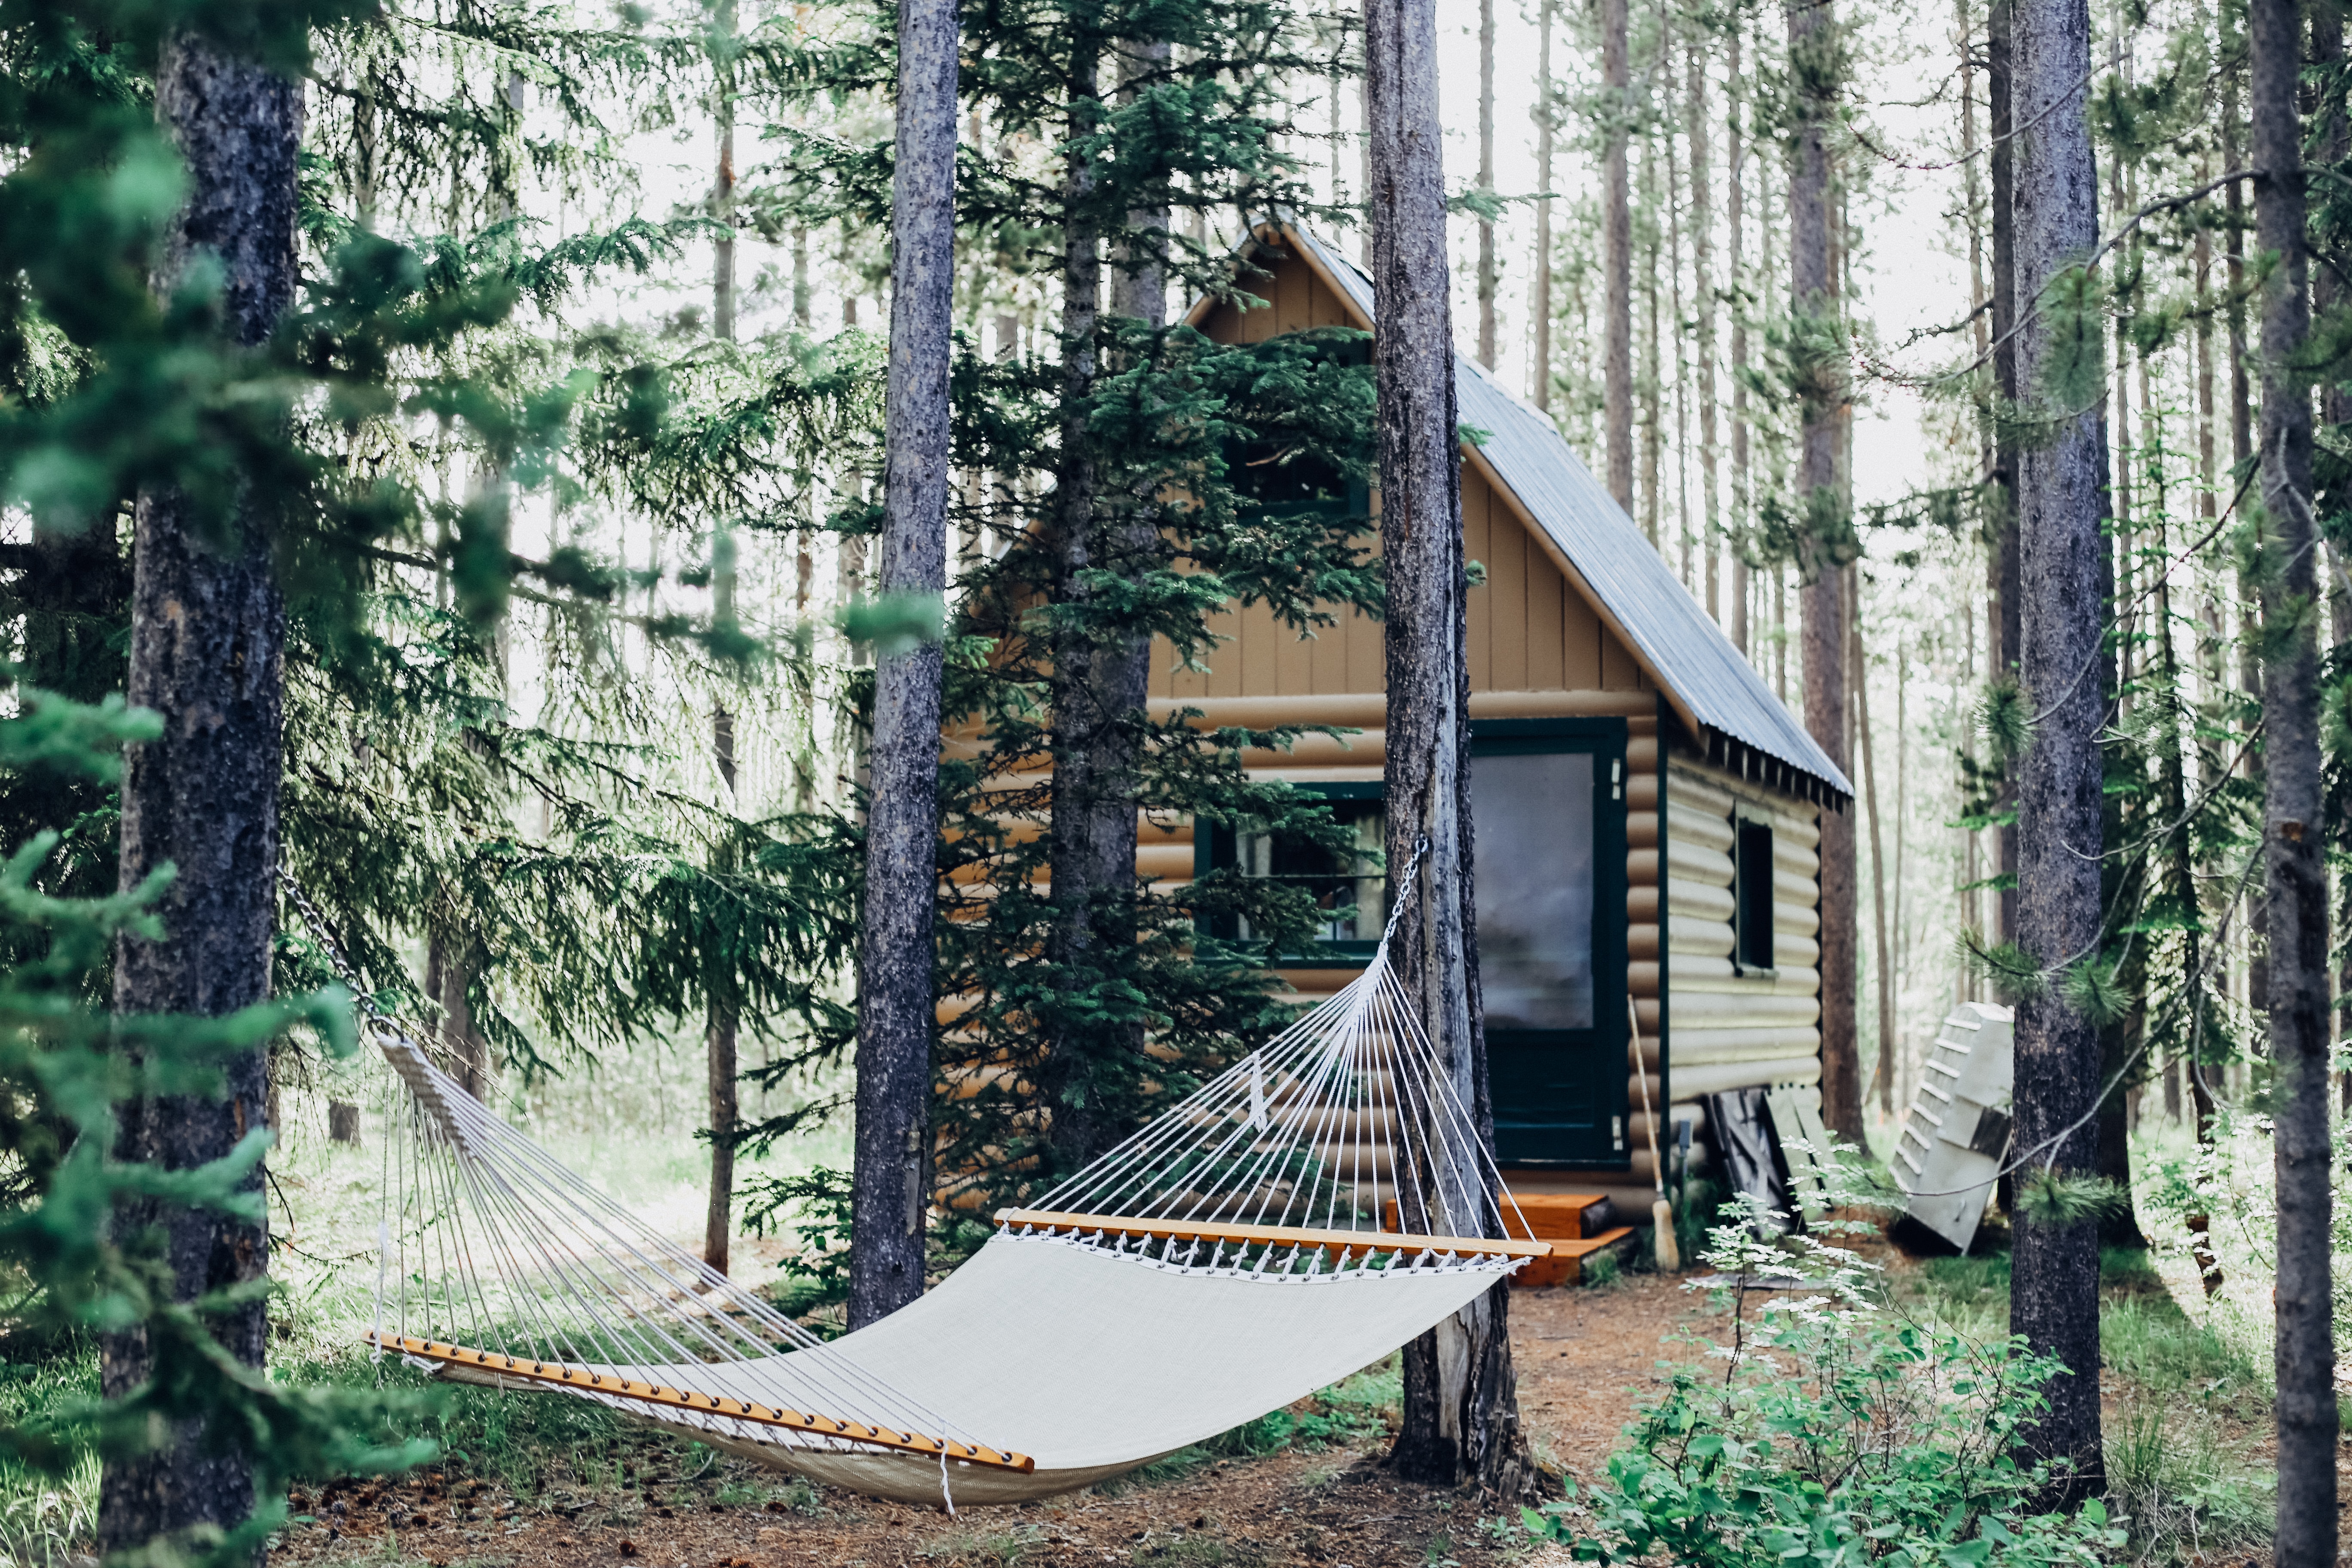 Cabin in the forest with a hammock out front.